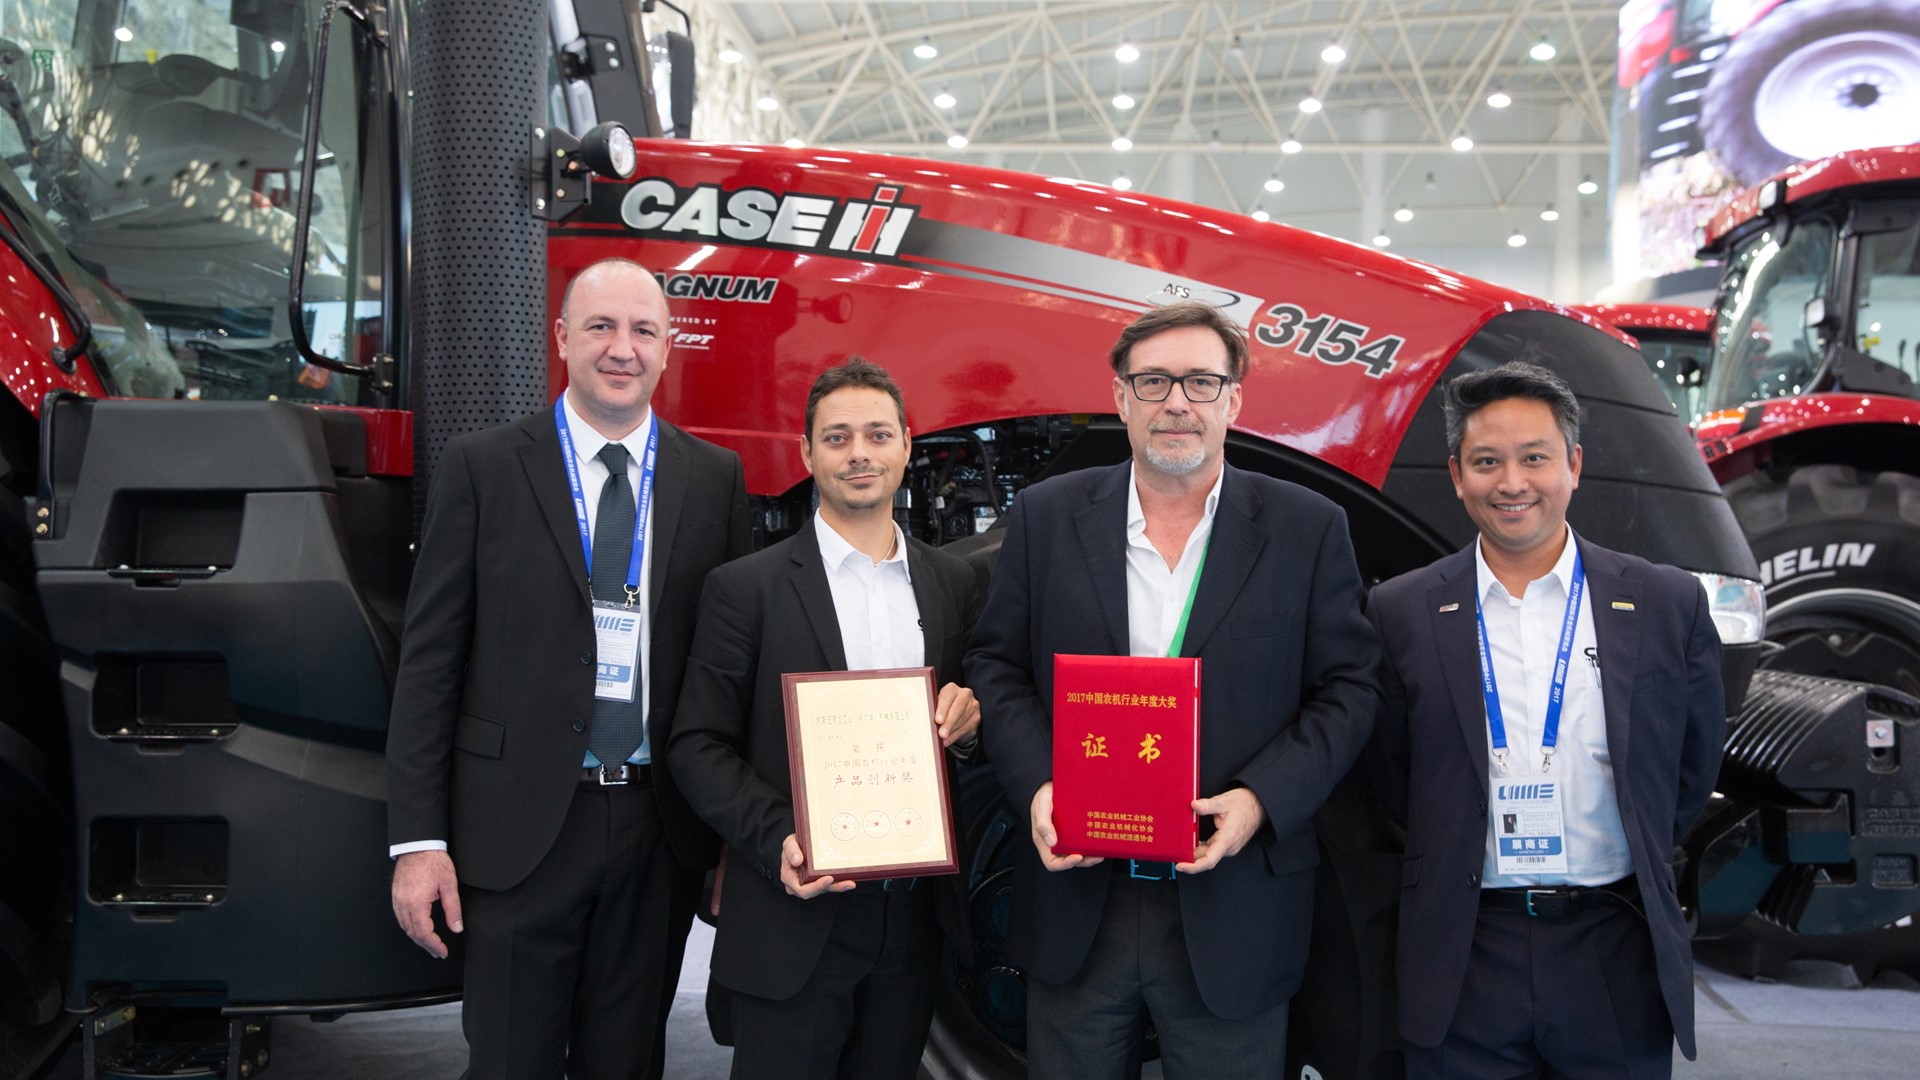 Case IH Magnum™ 3154 Tractor Wins Product Innovation Award at CIAME 2017